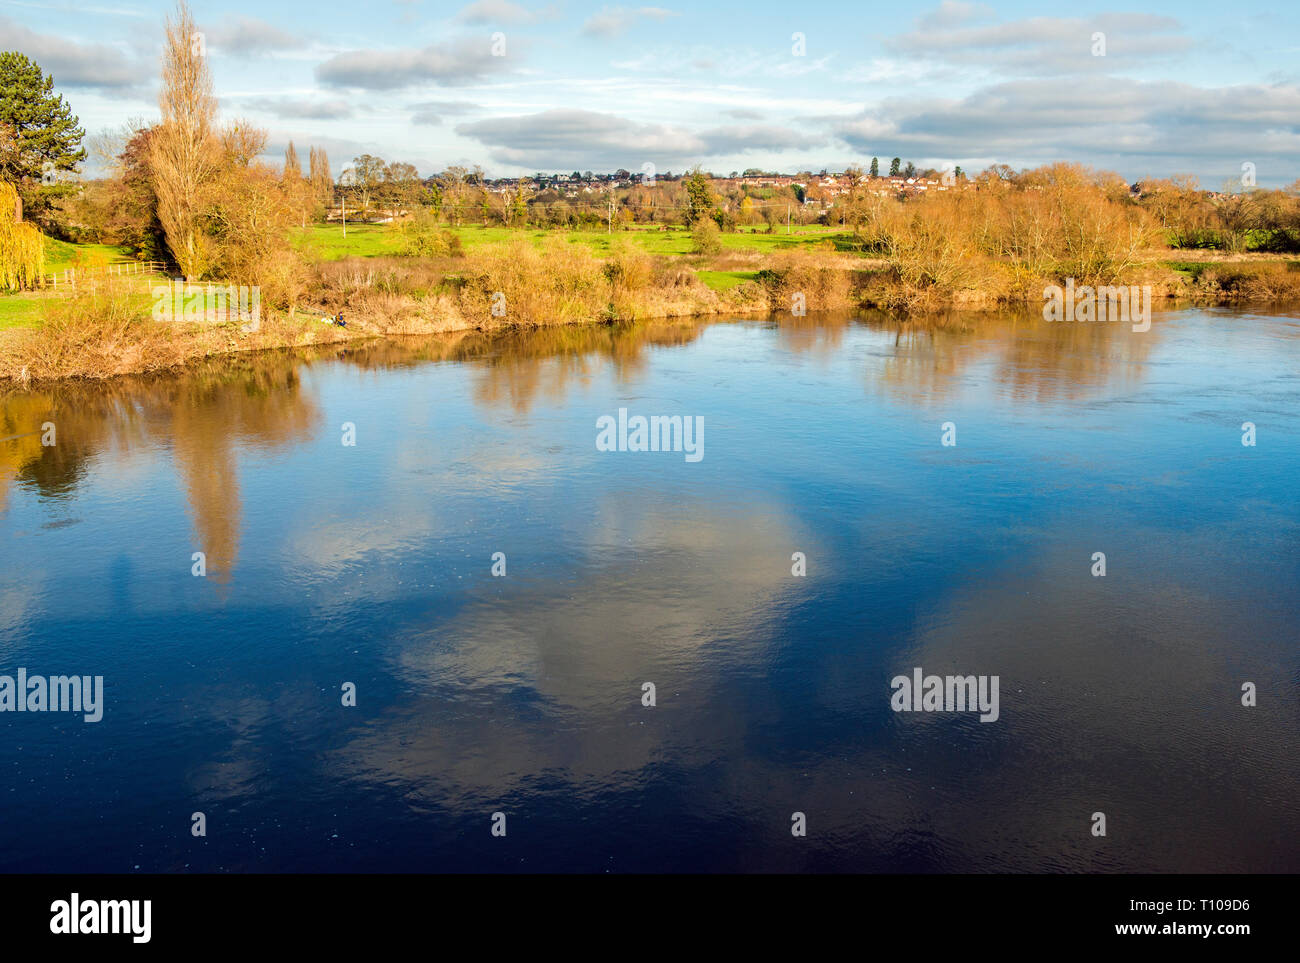 The River Wye at Ross on Wye on Herefordshire England showing reflections of the clouds in the water on a sunny autumn/winter day in November. Stock Photo